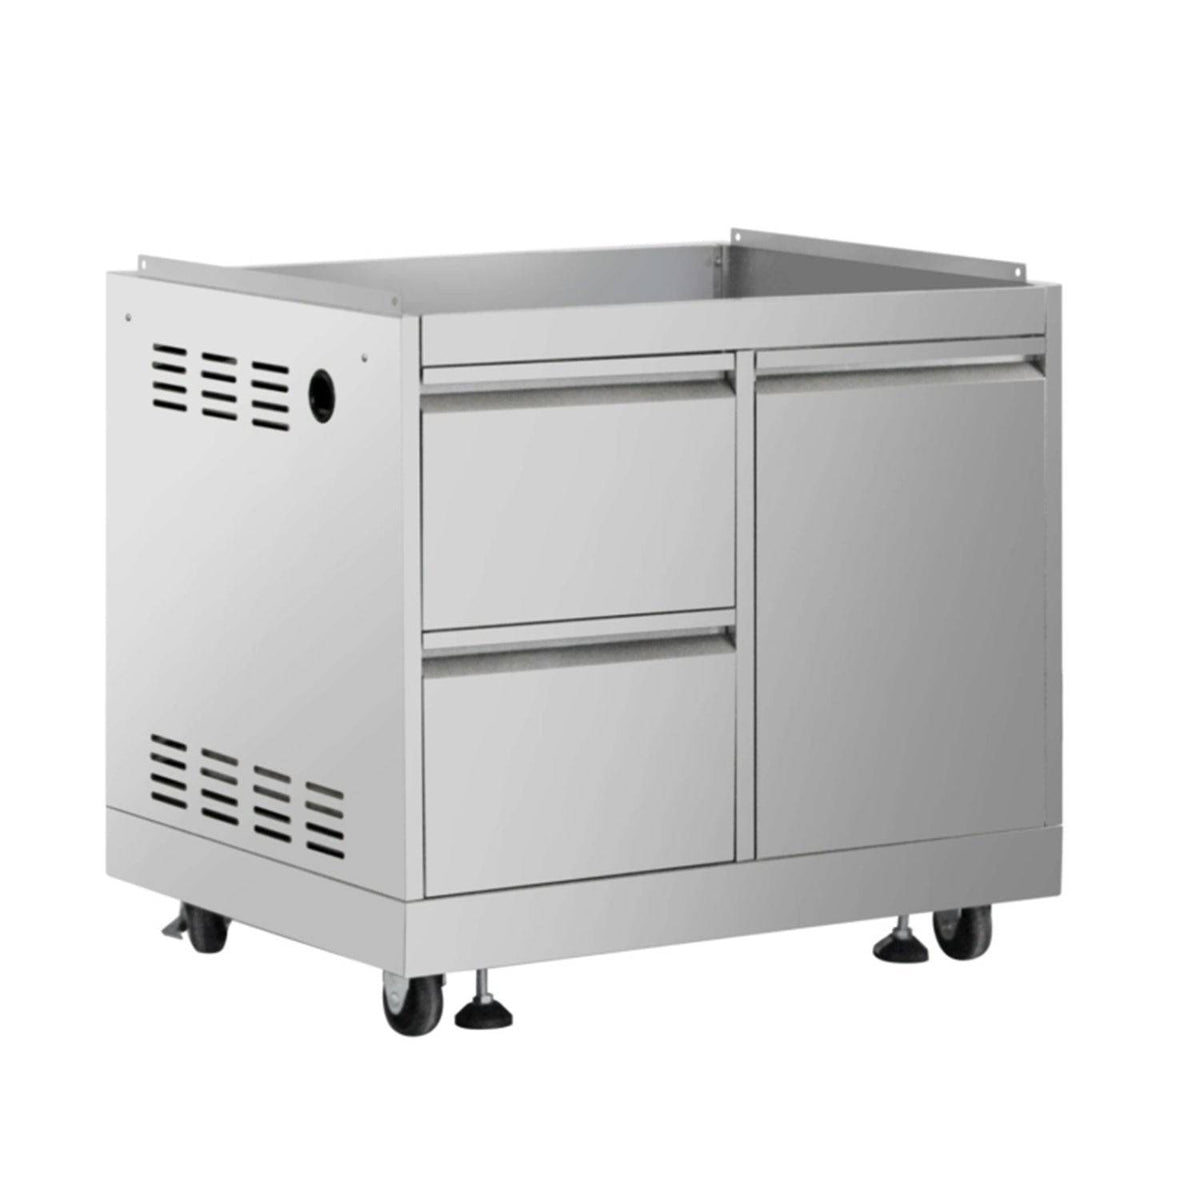 Fobest Outdoor Kitchen BBQ Grill Cabinet in Stainless Steel - Gas Grill Cabinet-Fobest Appliance